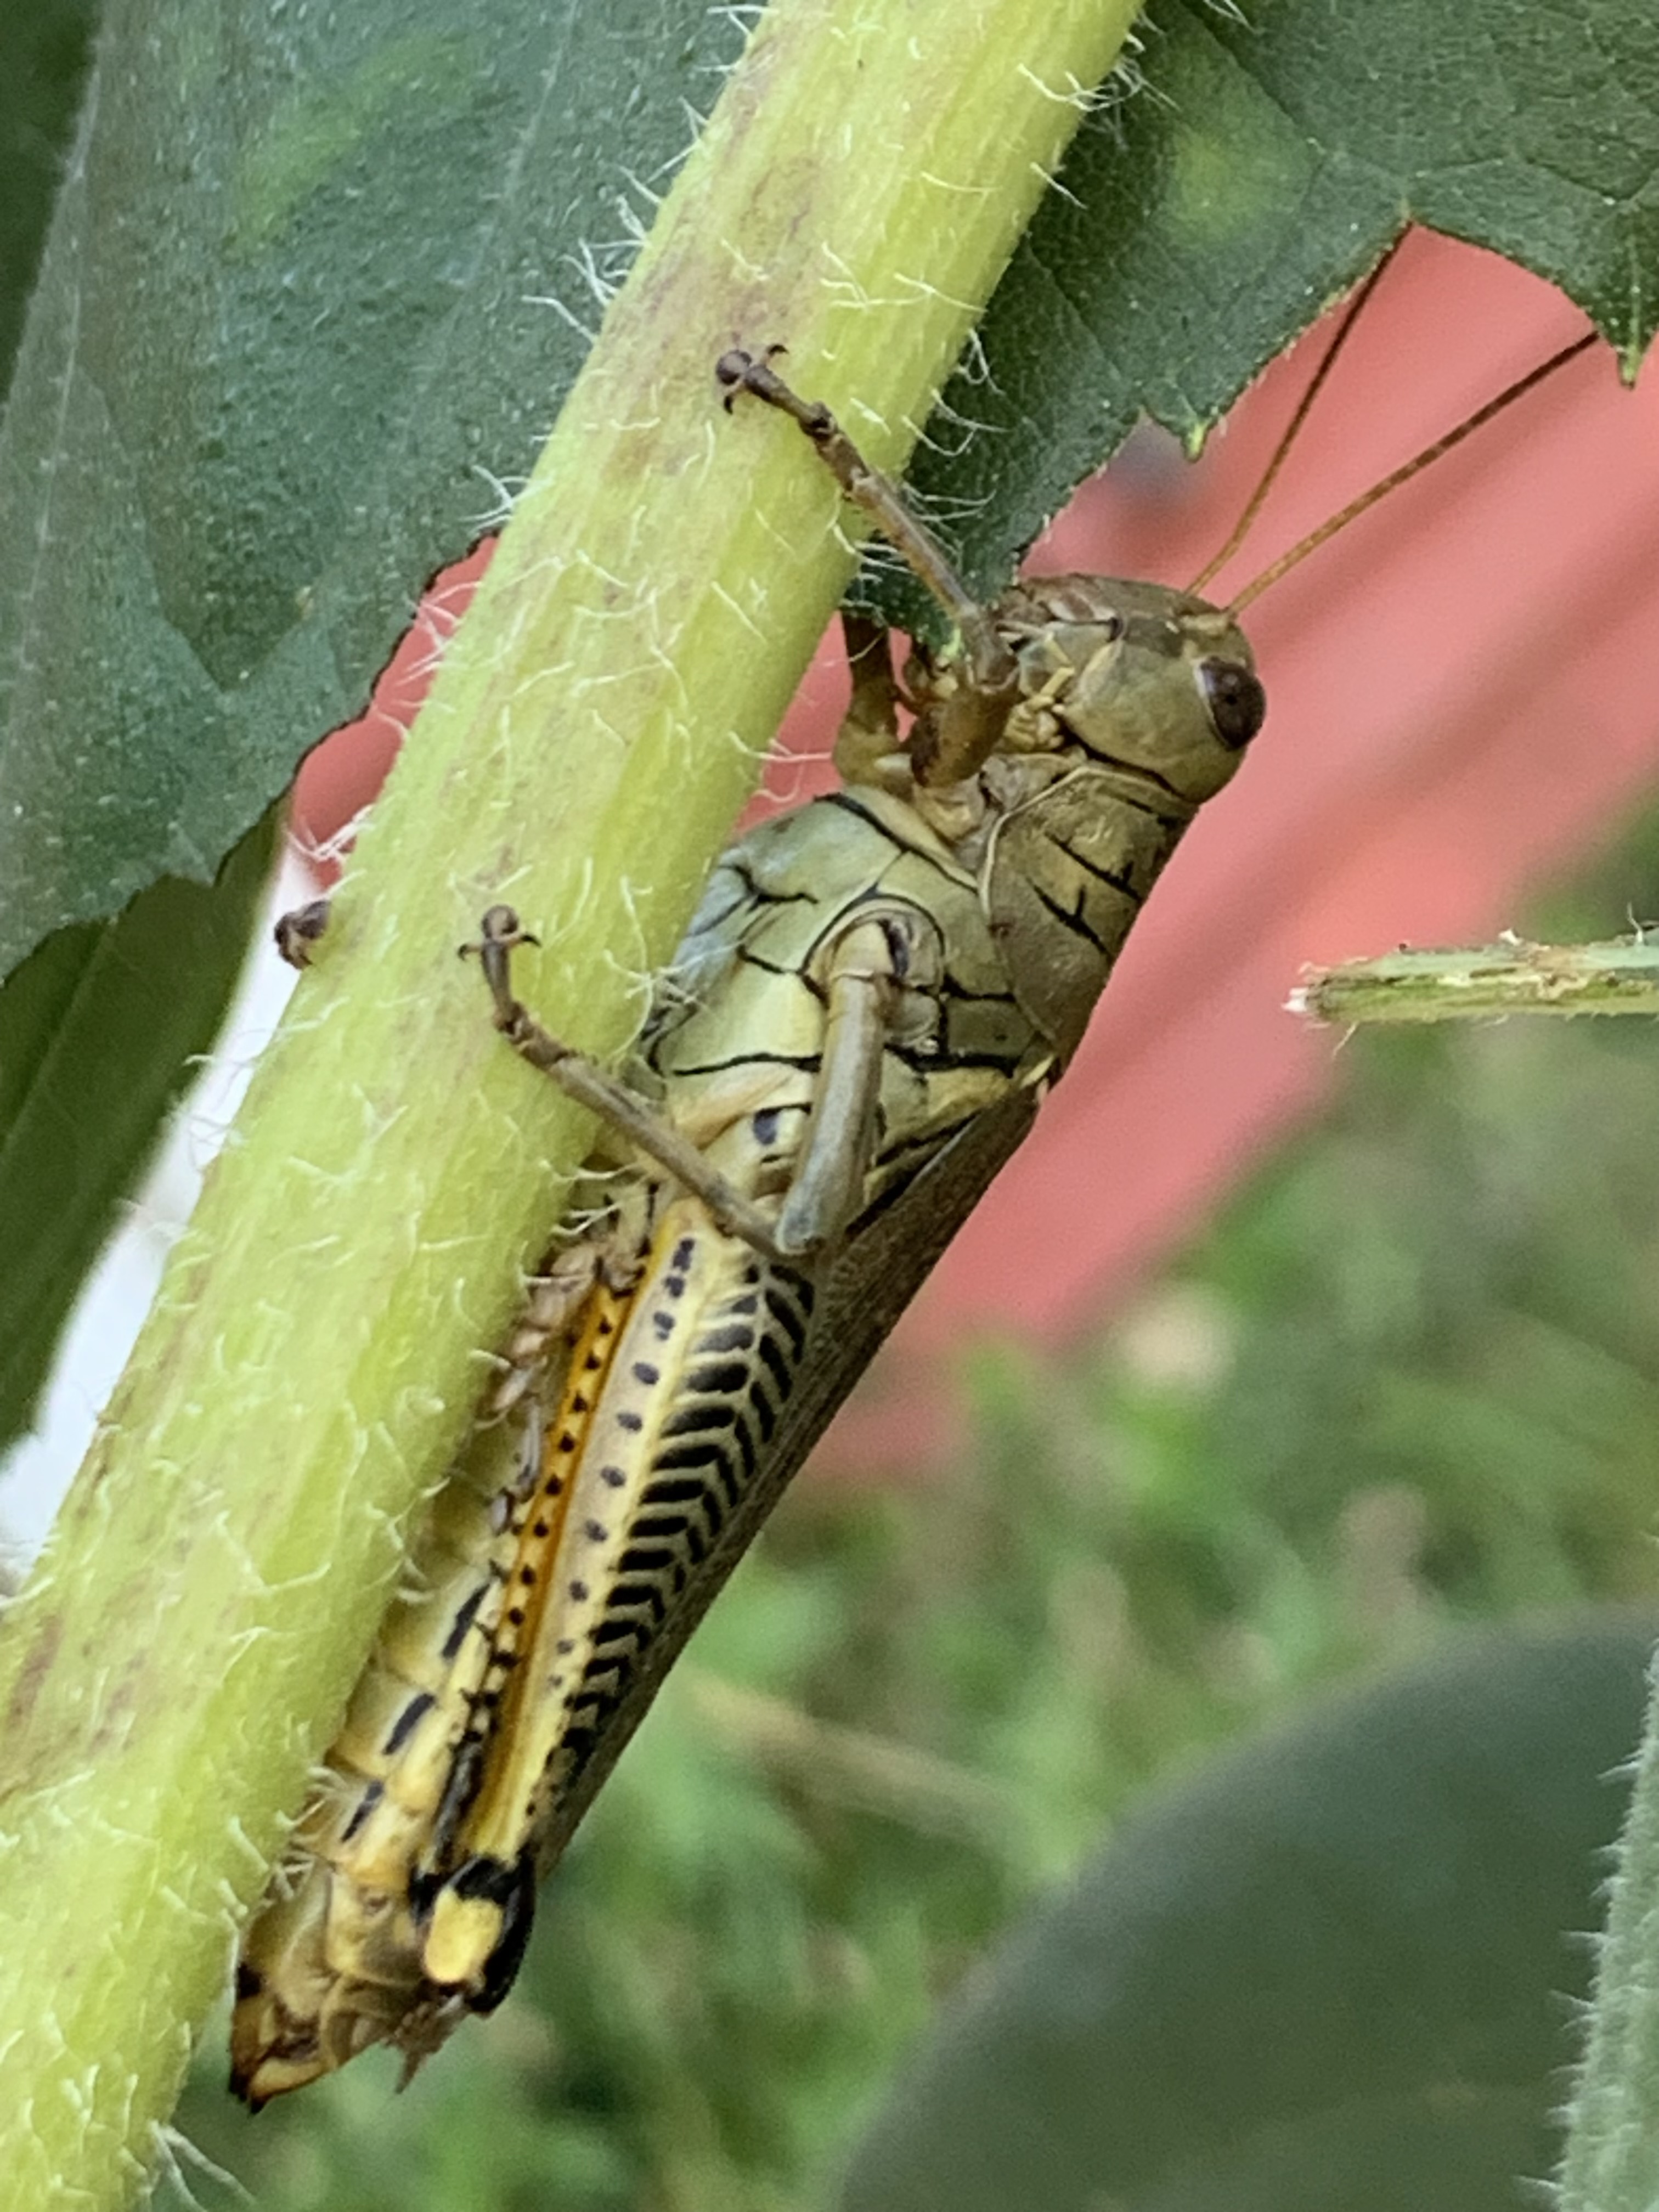 Green insect with dark chevron markings on the long hind legs it uses for jumping. Differential grasshopper clings to a sunflower stem in the early morning light. Too cold to move now, it will warm and become active with the sun’s arrival.